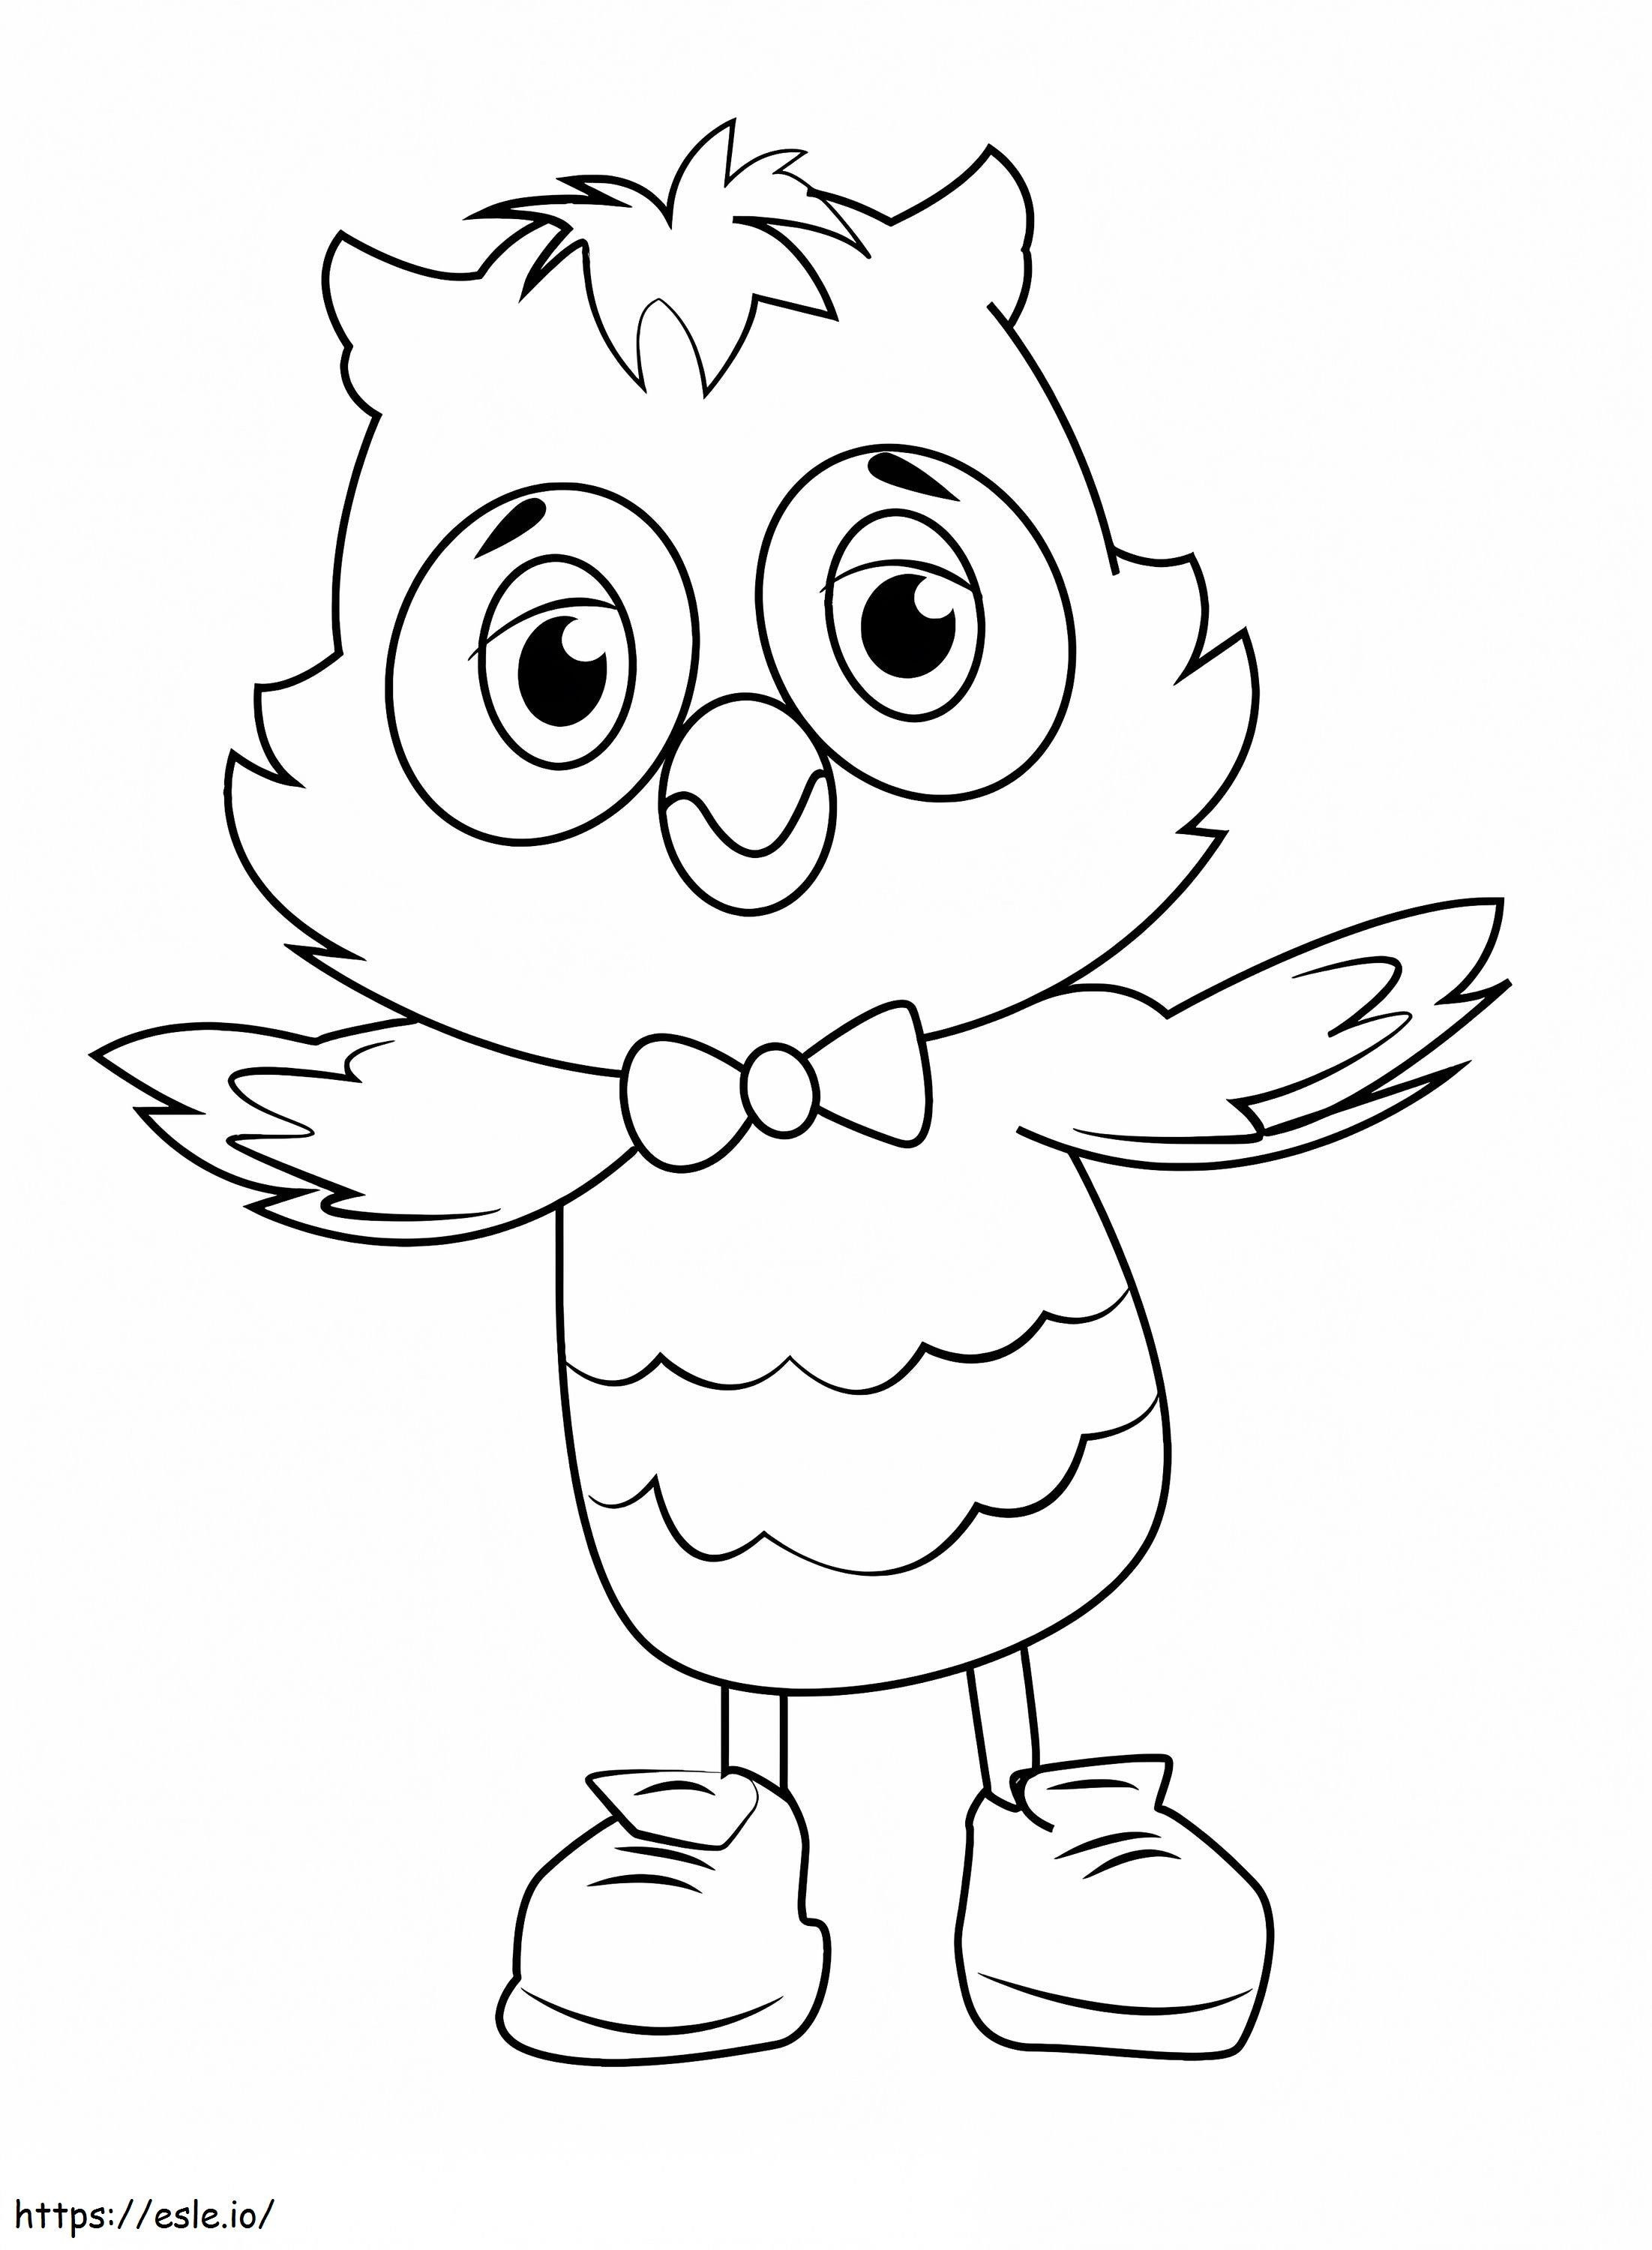 1573608031 Daniel Tiger X The Owl 1 coloring page